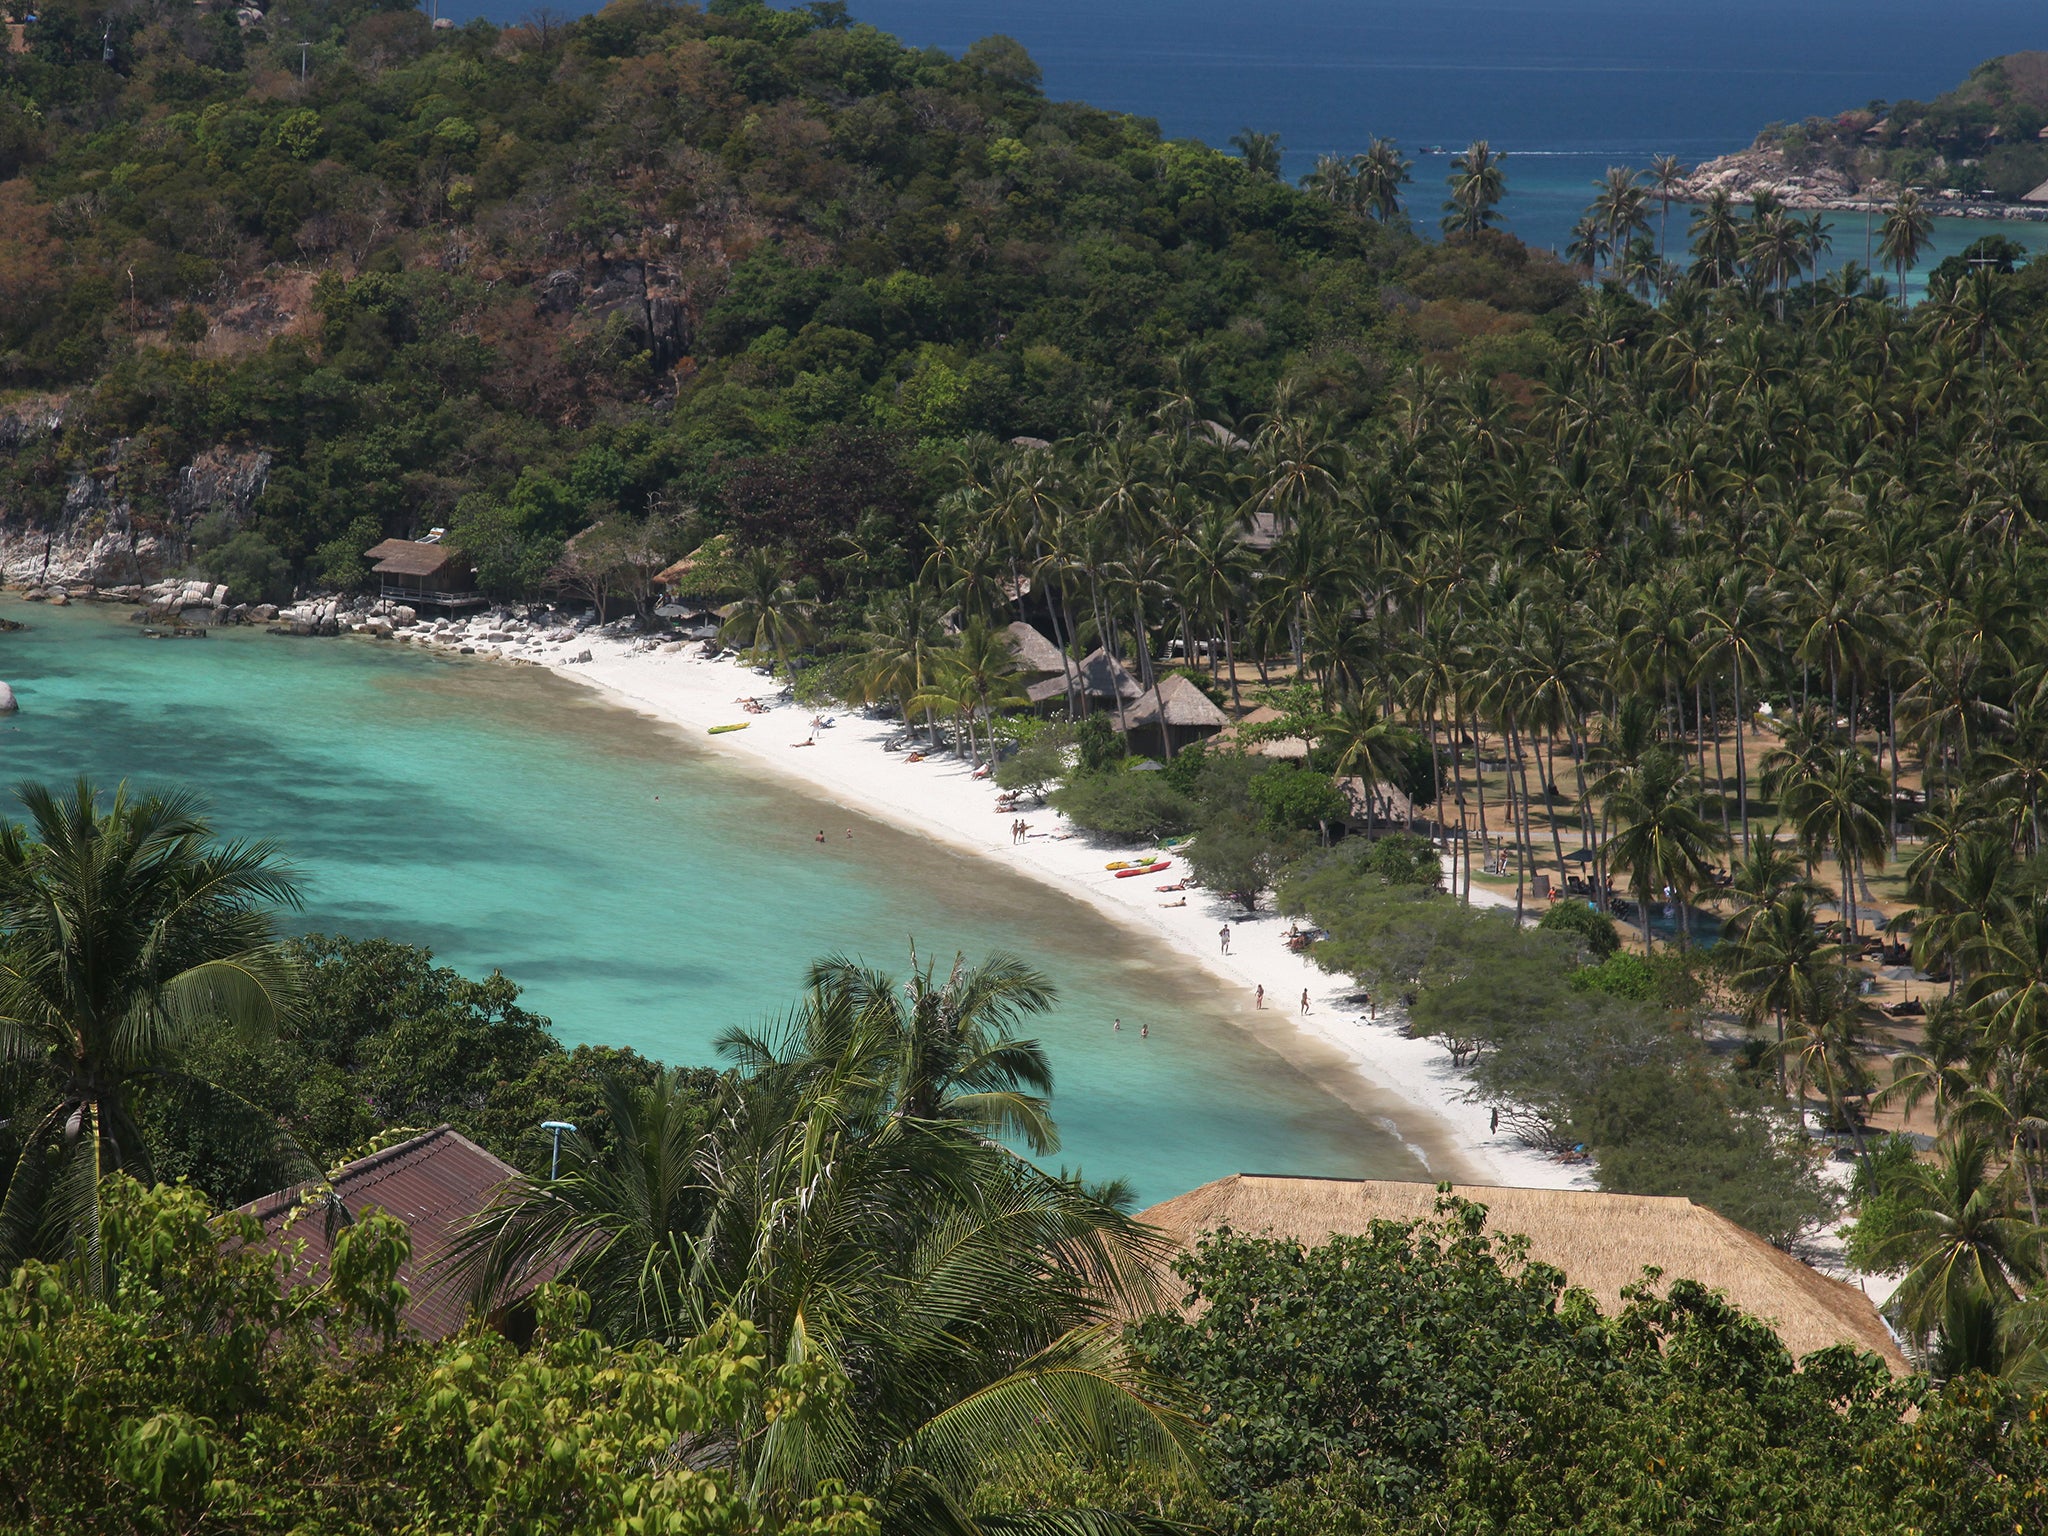 Koh Tao is smaller and more remote than its larger neighbours, Koh Samui and Koh Phangan